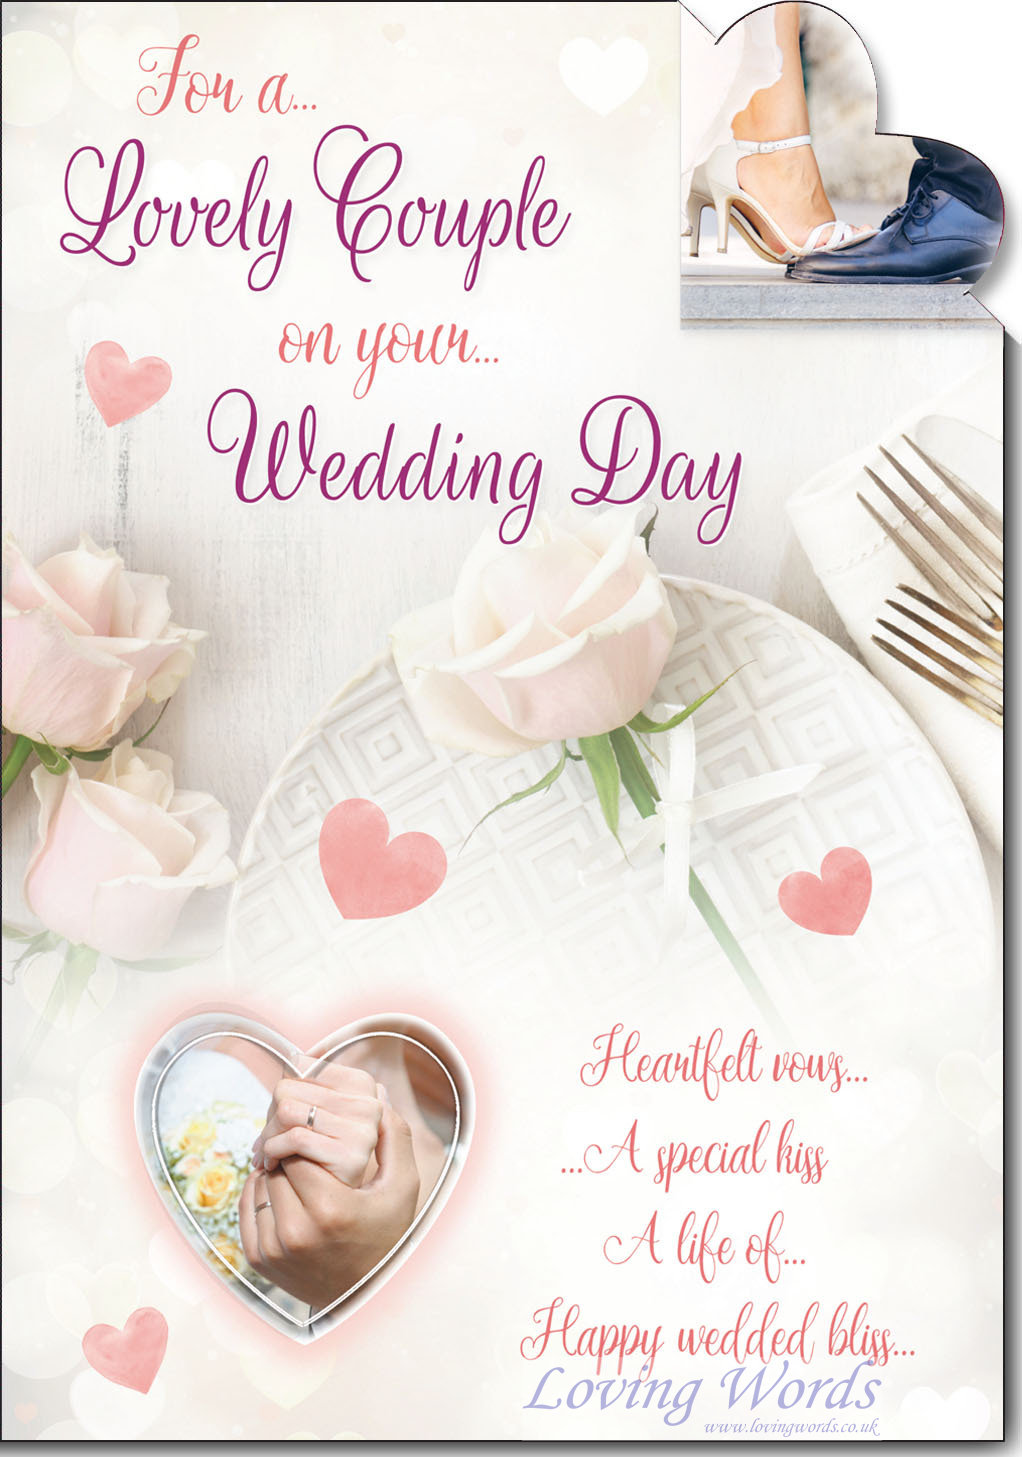 Lovely Couple Wedding | Greeting Cards by Loving Words